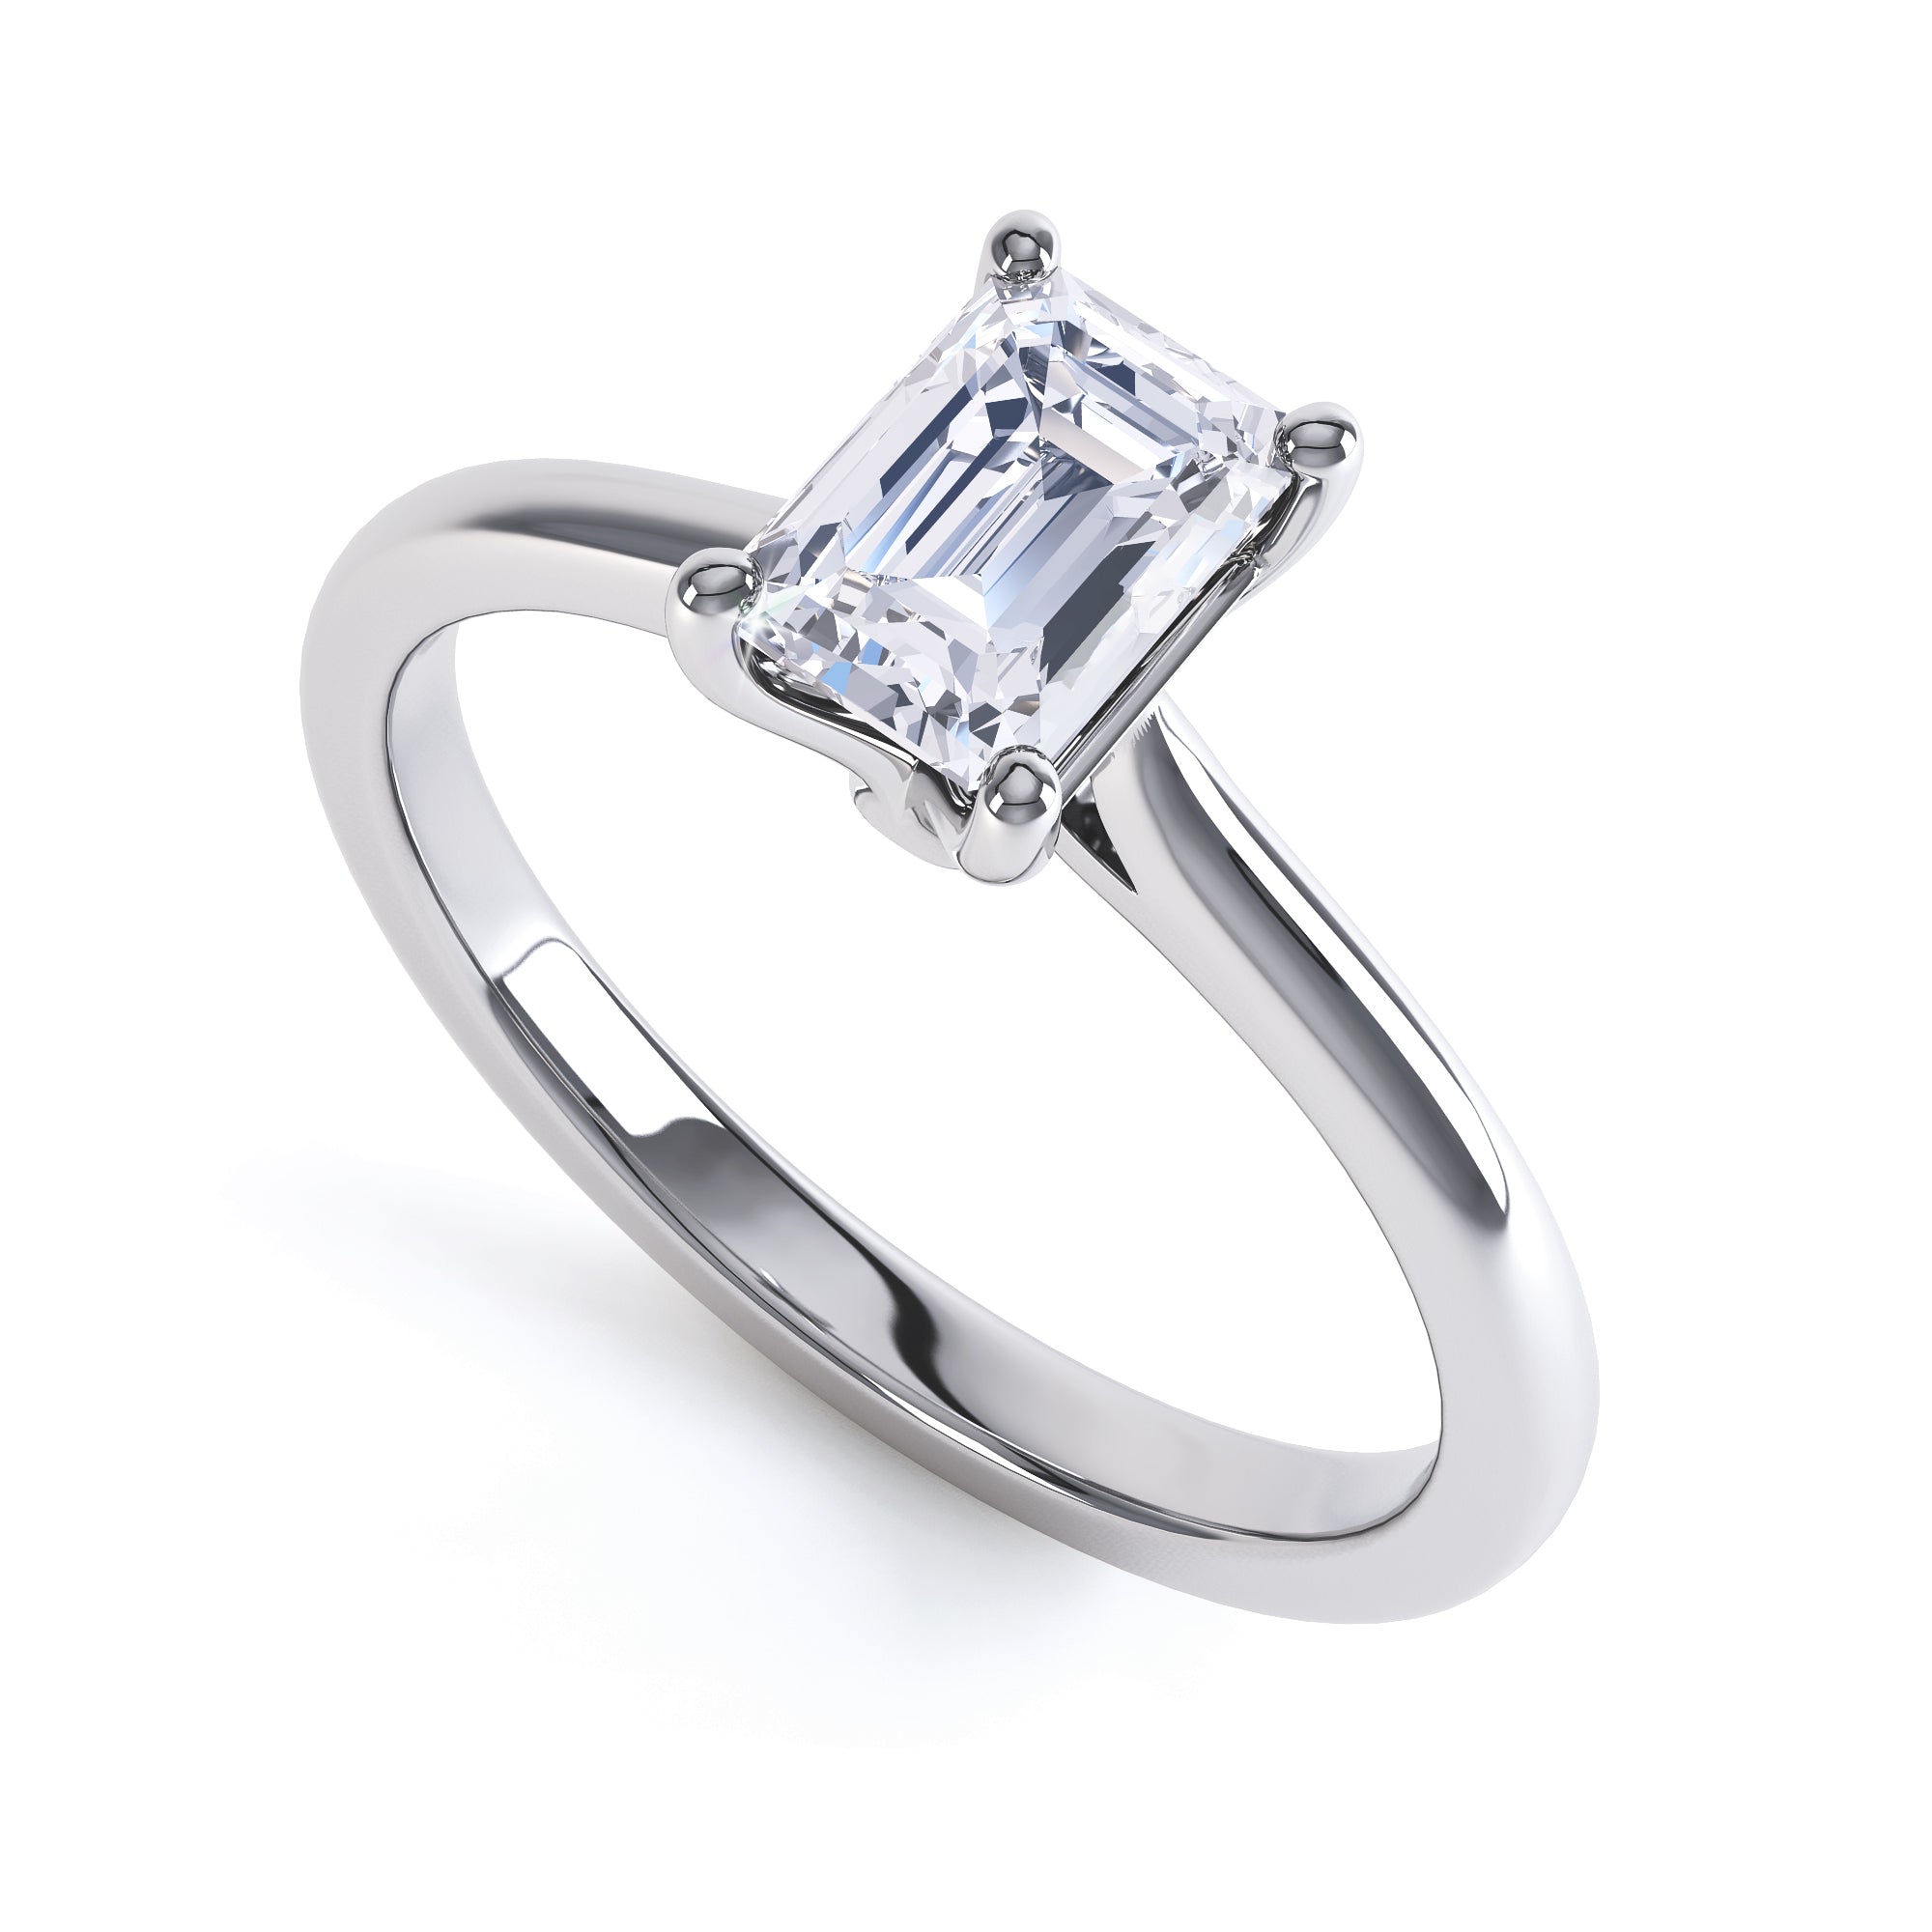 Diamond Engagement Ring- Emerald Corner 4 Claw Knife Edge Shoulders with cathedral setting